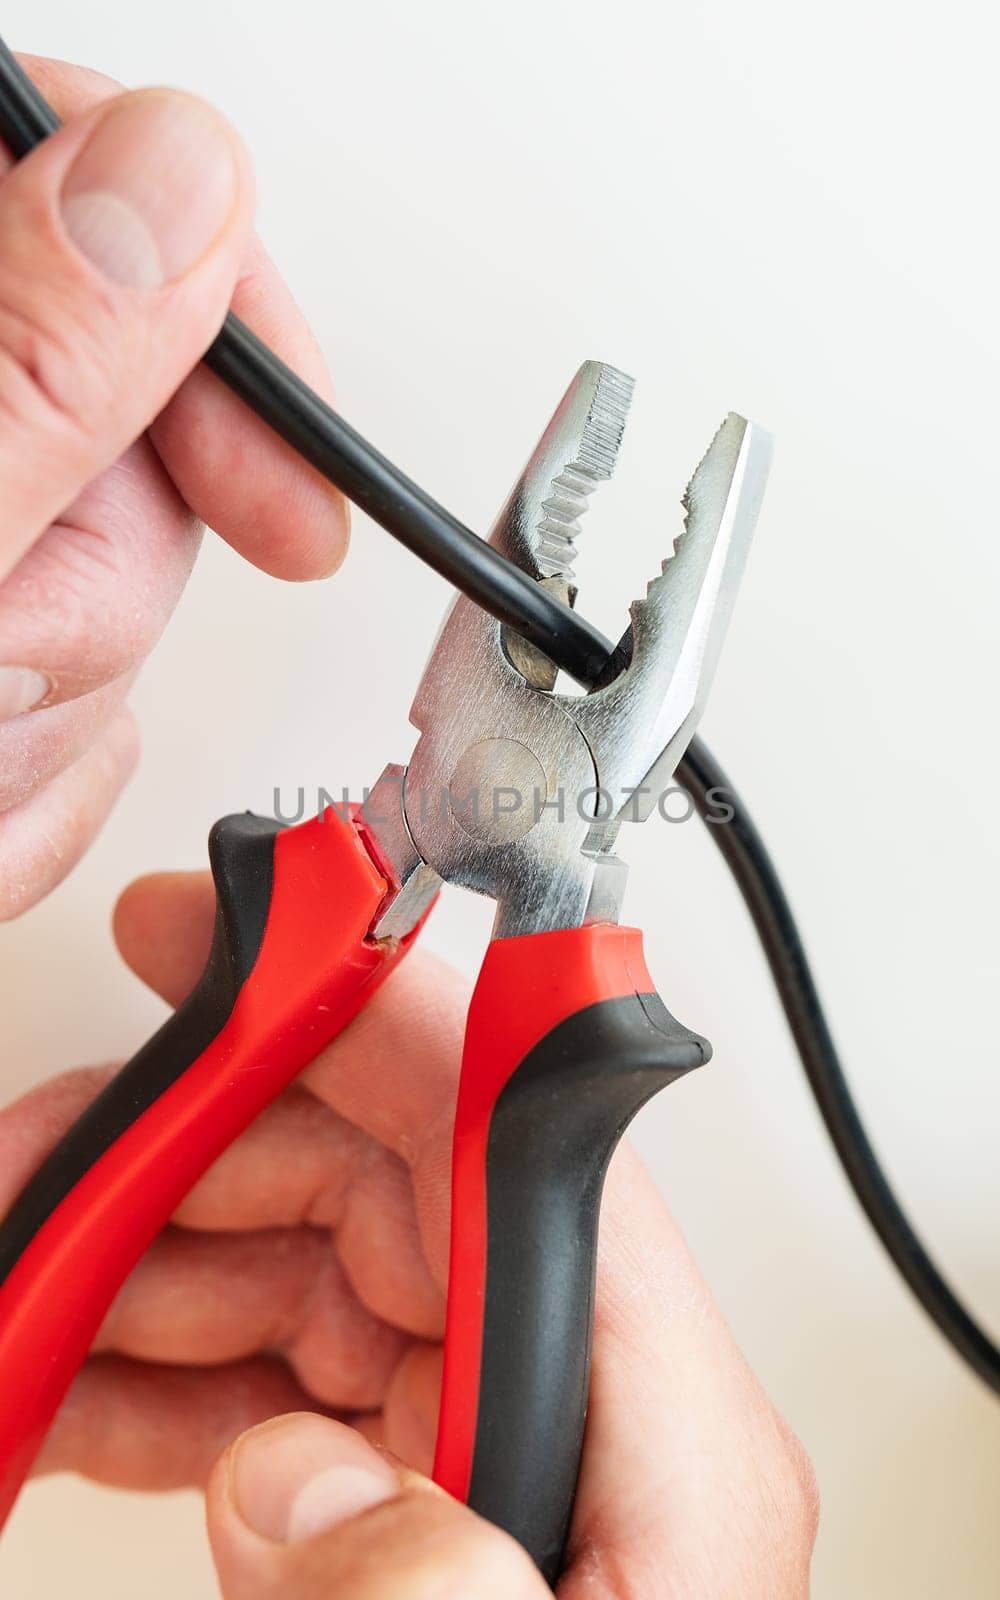 Close-up of hands using pliers to cut a black wire, highlighting a DIY electrical repair task